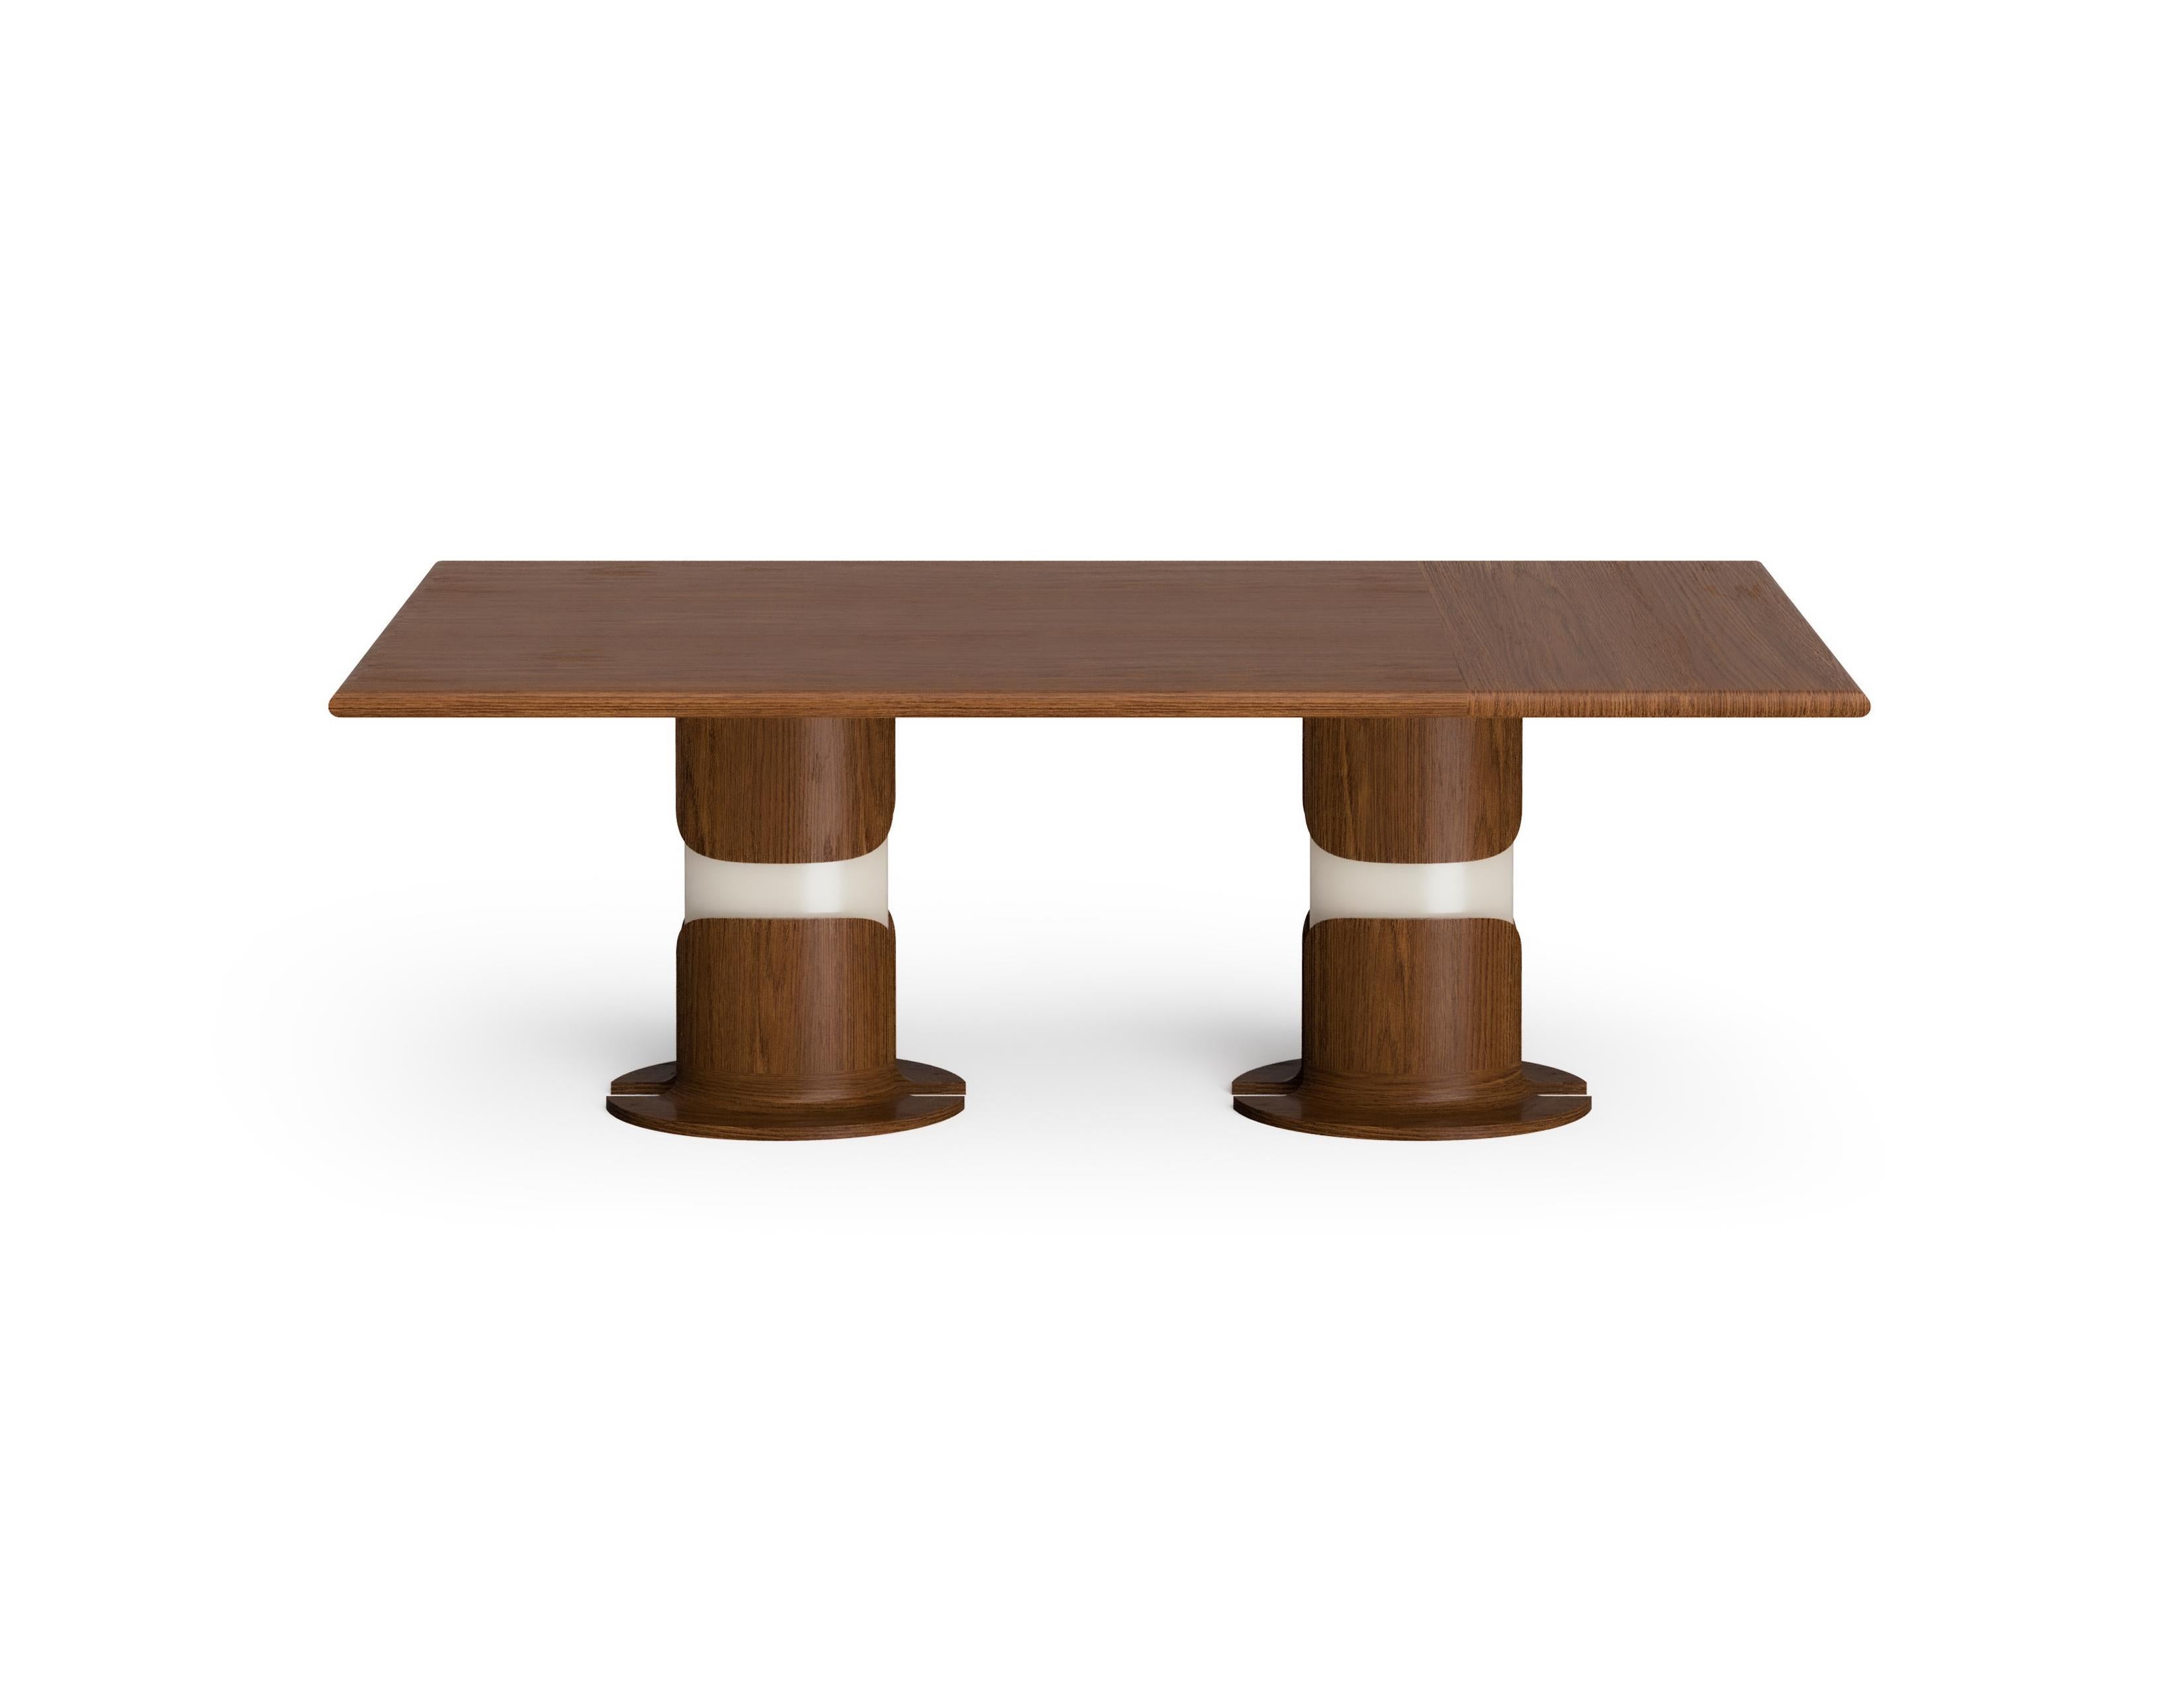 Dogum dining table displays a sculptural and powerful stance. The flower-like form of the legs symbolizes birth. The form of the lower part of the dining table consists of solid walnut, walnut veneer and glossy lacquer on wood. The dining table’s